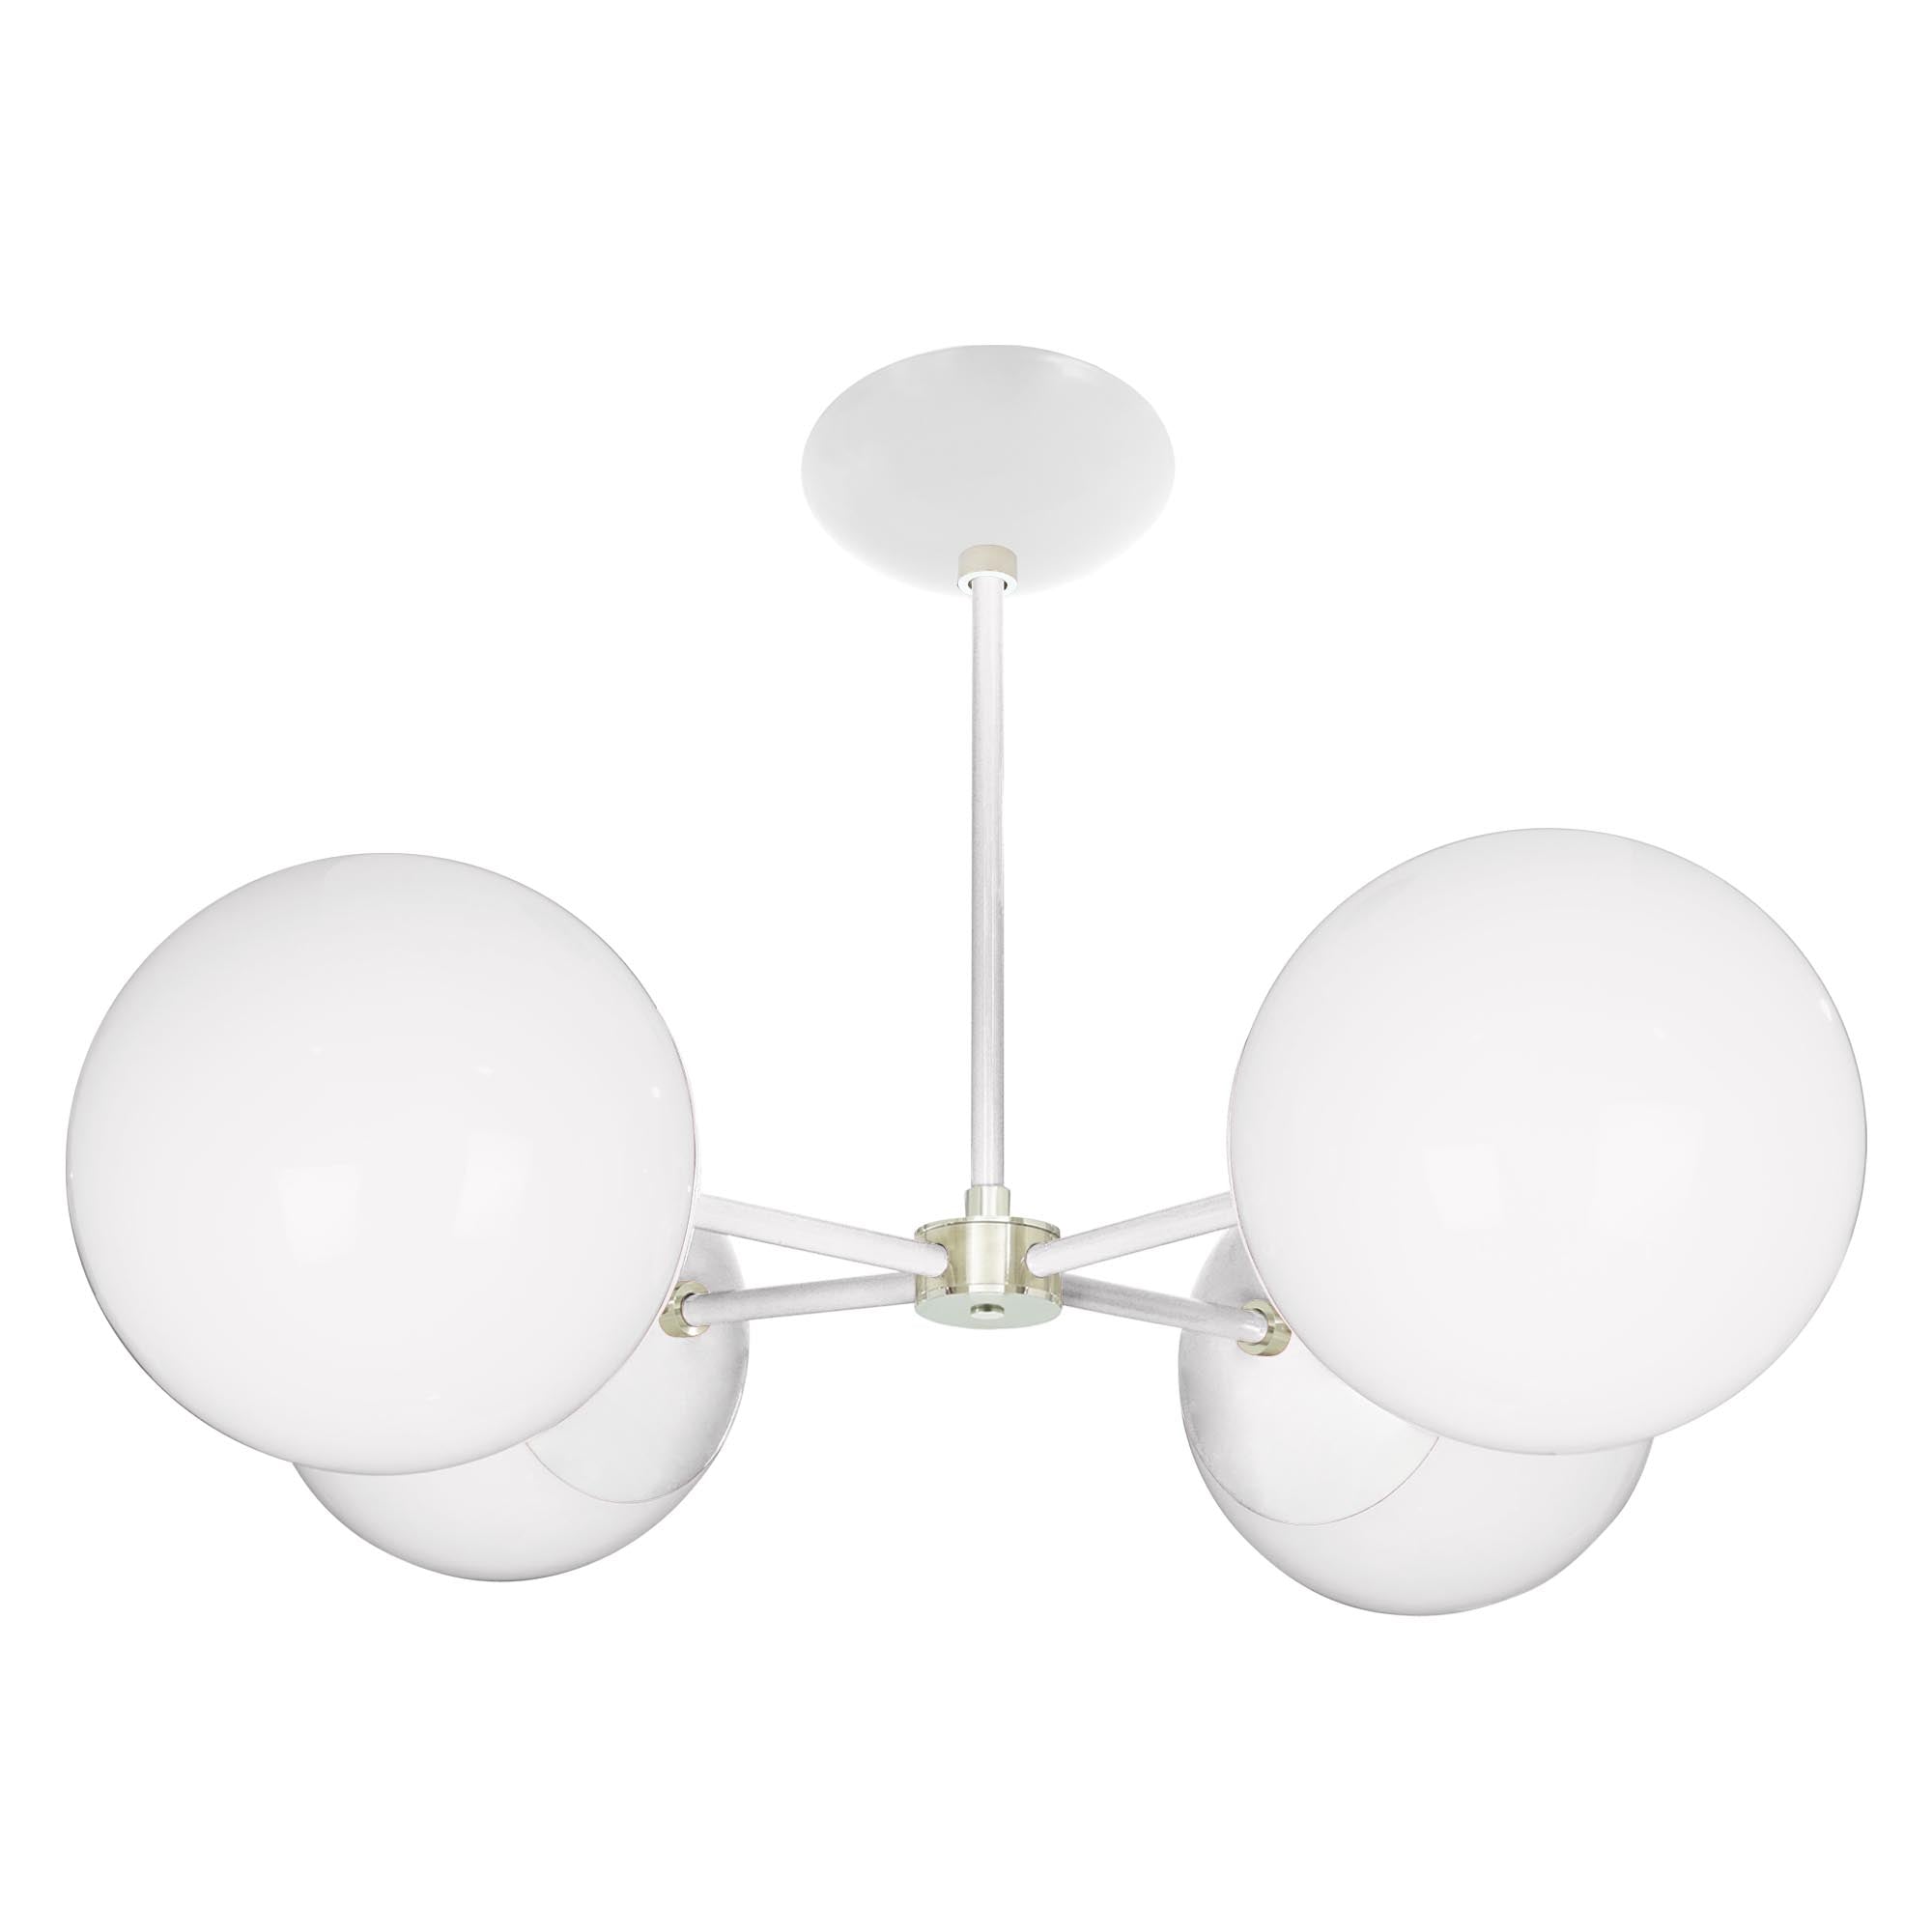 Nickel and white color Big Orbi chandelier Dutton Brown lighting